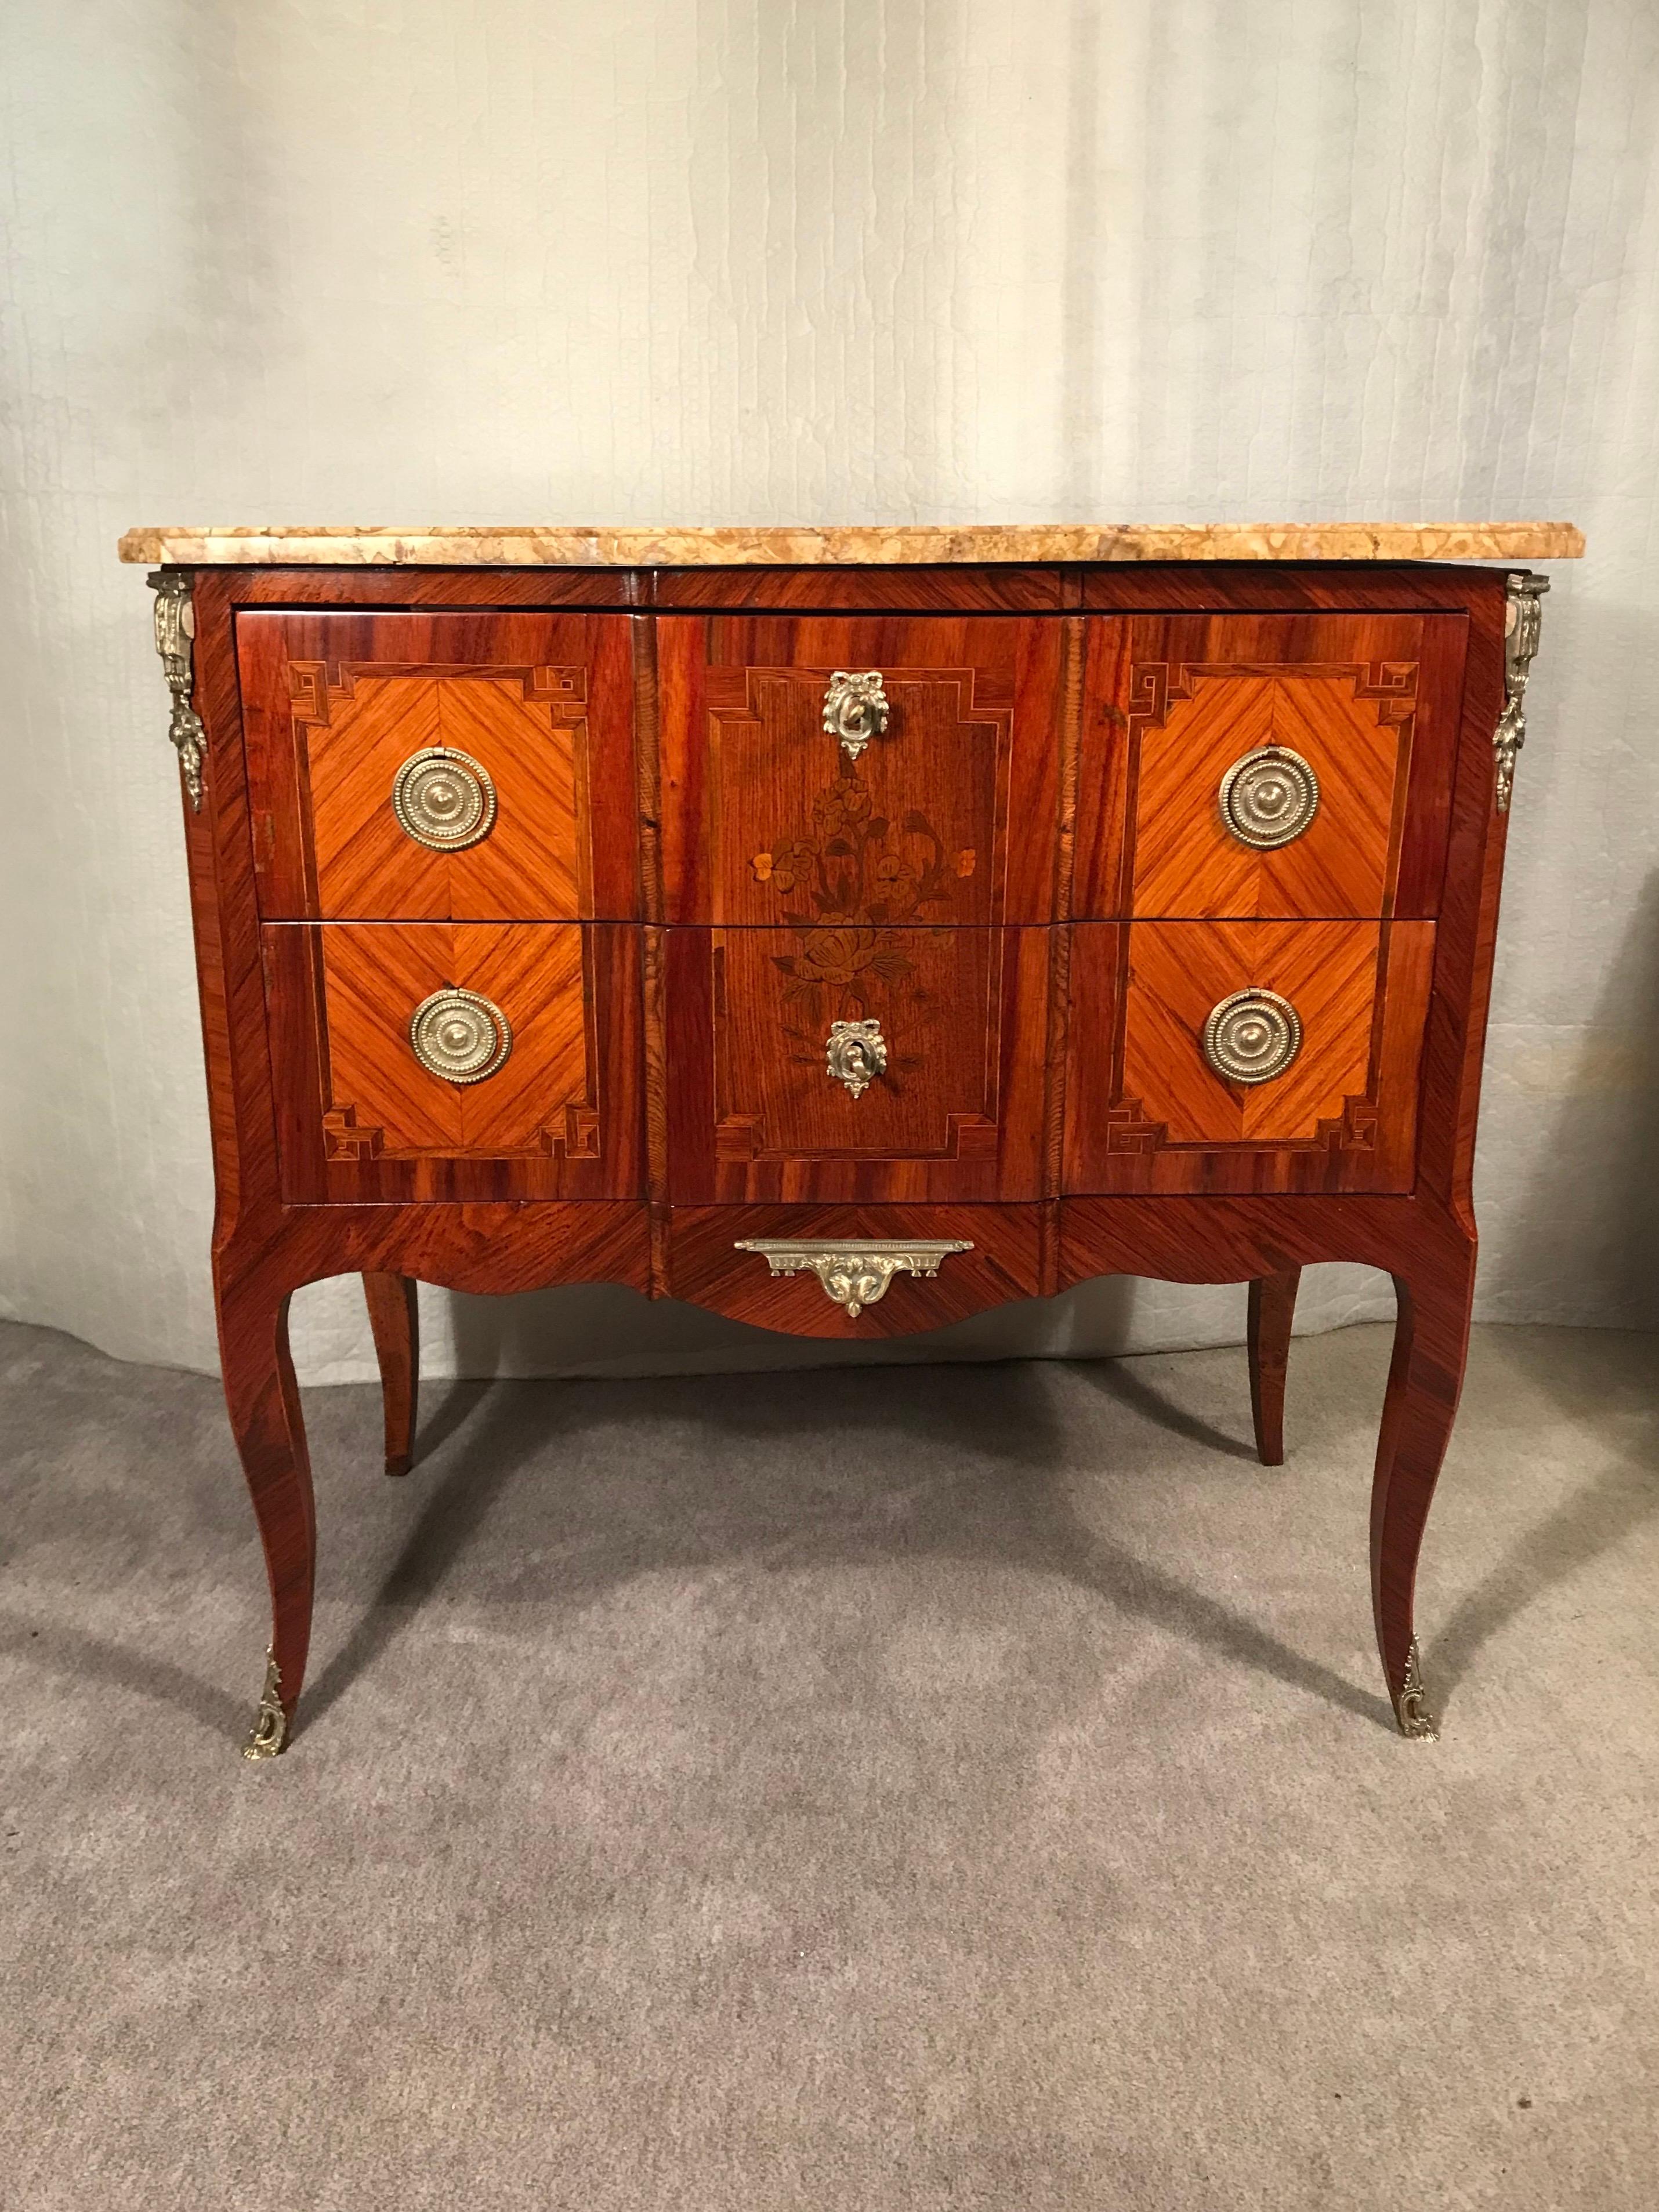 Explore the timeless elegance of a late 18th-century French Louis XVI chest of drawers. This exquisite piece stands gracefully on slender cabriole legs and features two drawers adorned with beautiful kingwood veneer and flower marquetry decor sans